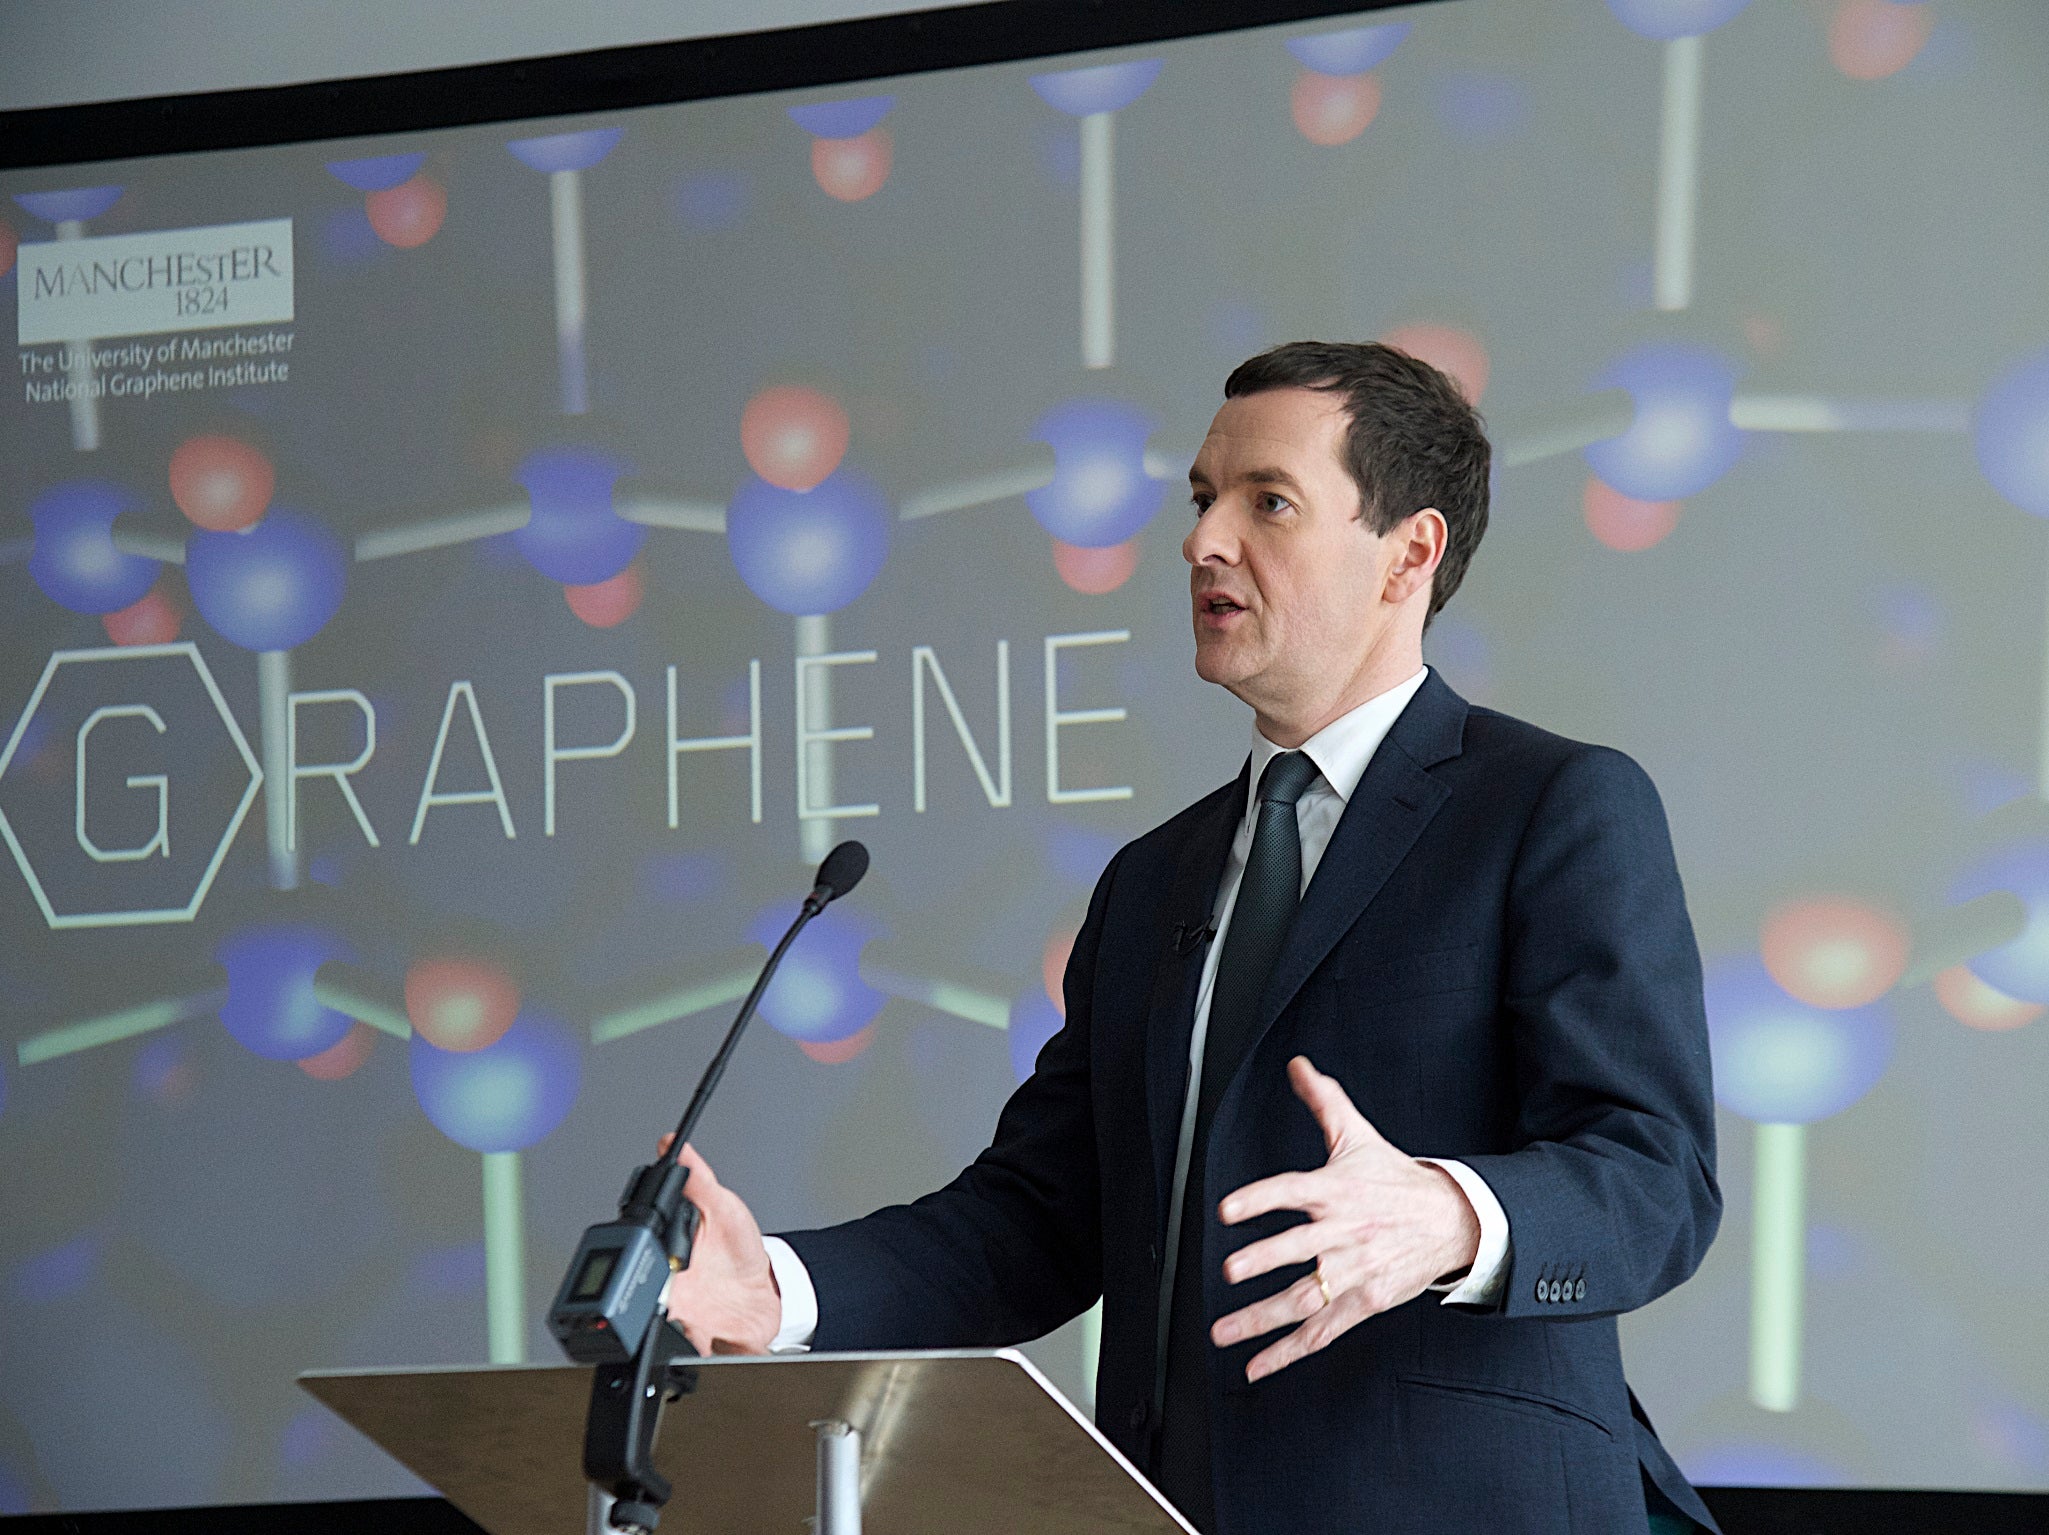 George Osborne will take up the role in July 2017